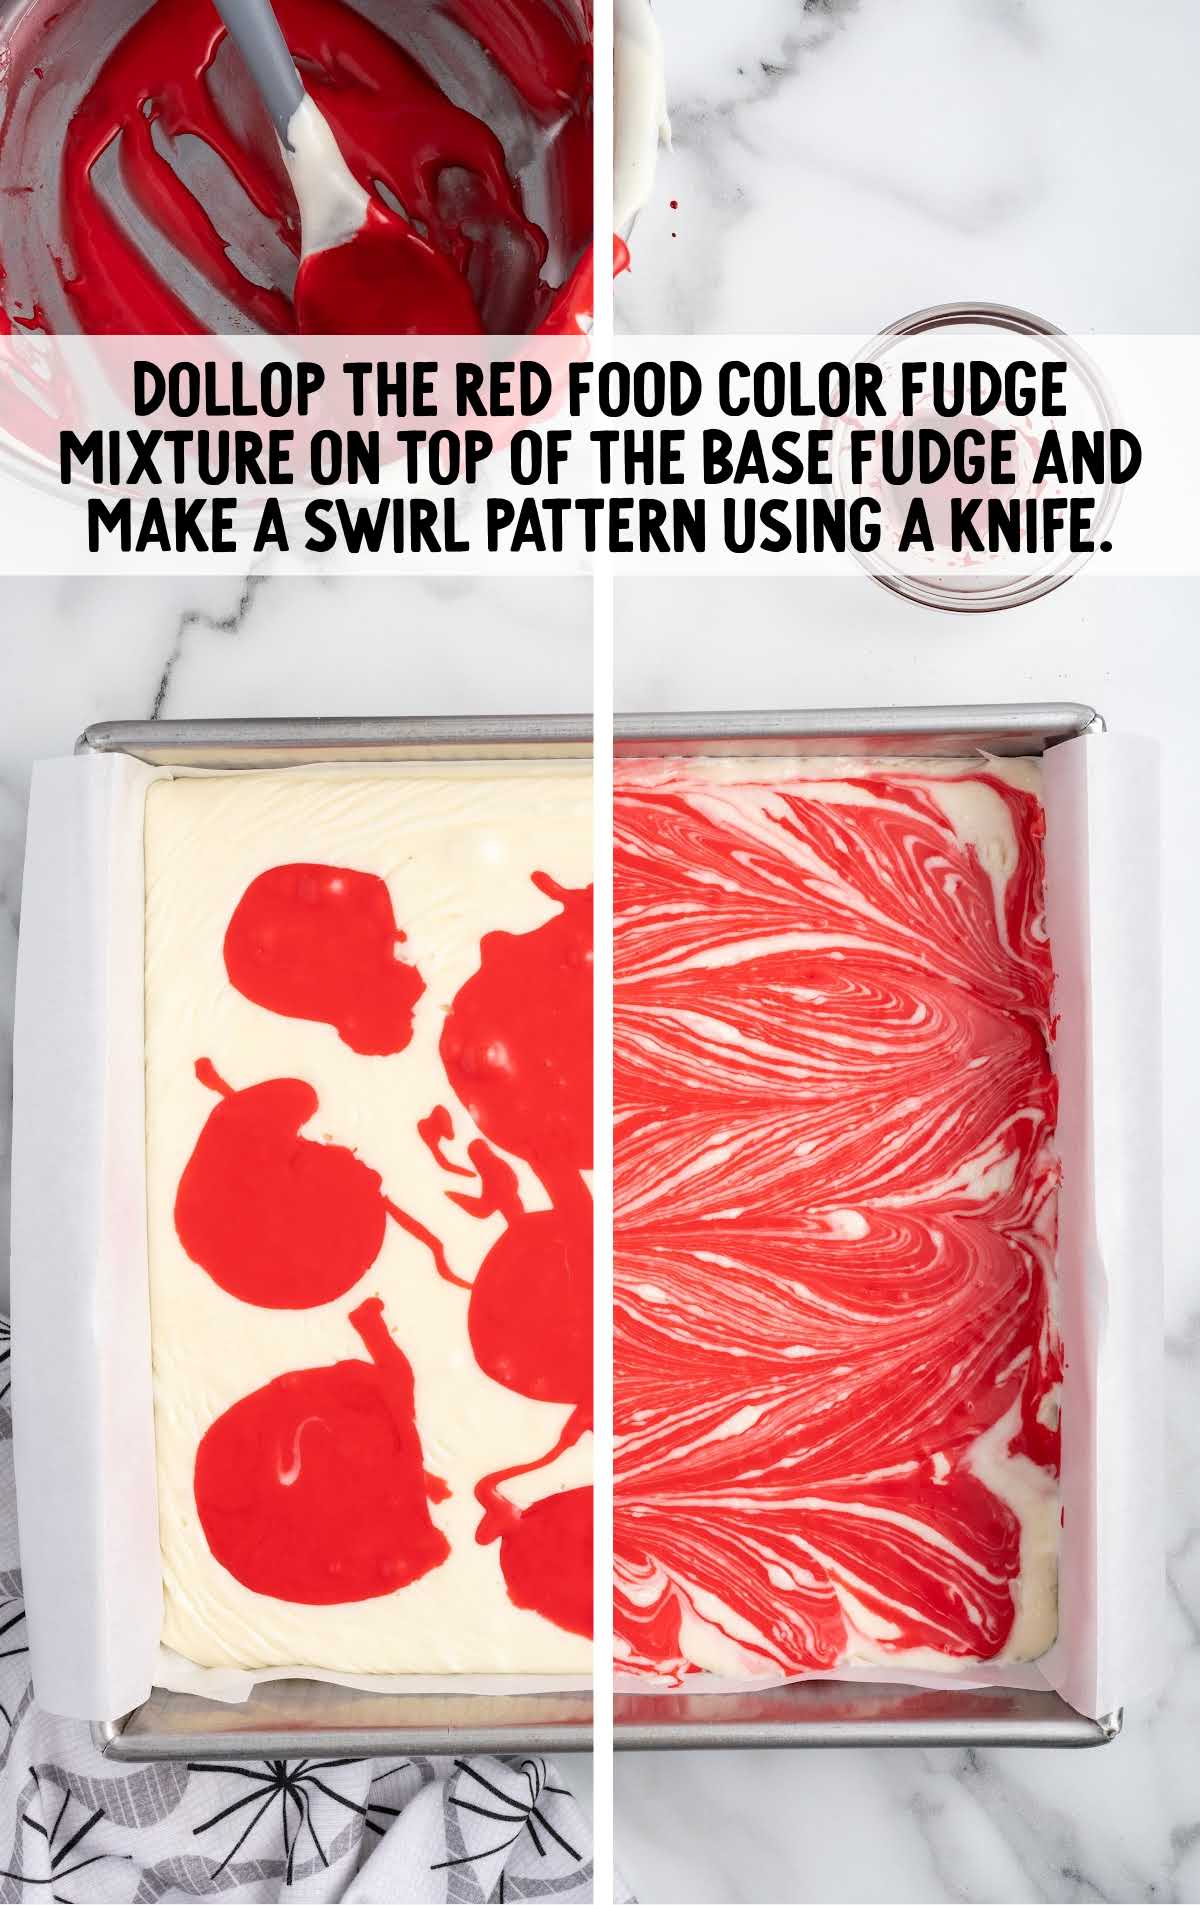 red food coloring dollop on top of the base fudge